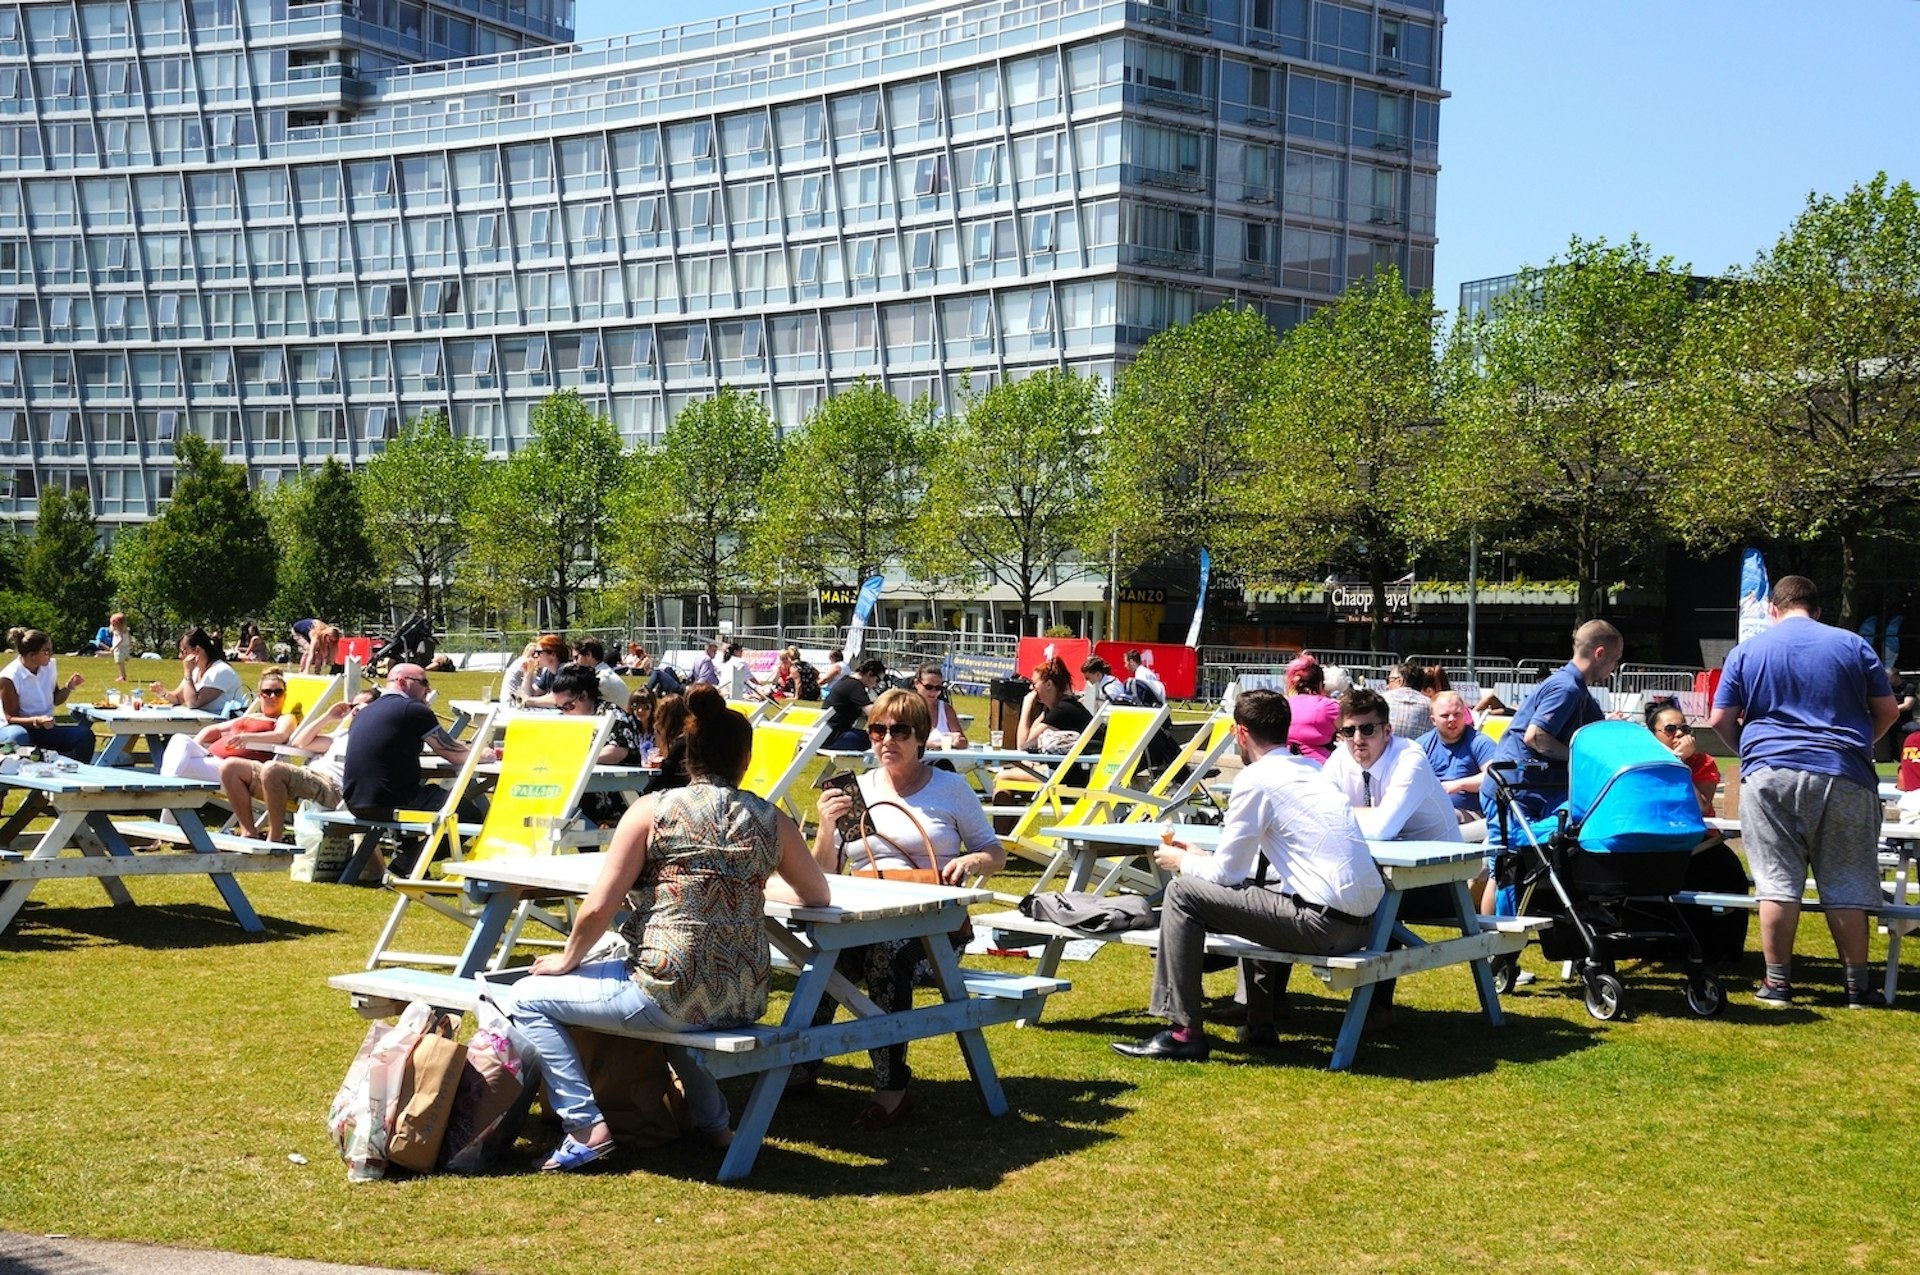 People relaxing at picnic benches in Chavasse Park in summer, Liverpool, Merseyside, England, United Kingdom, Western Europe